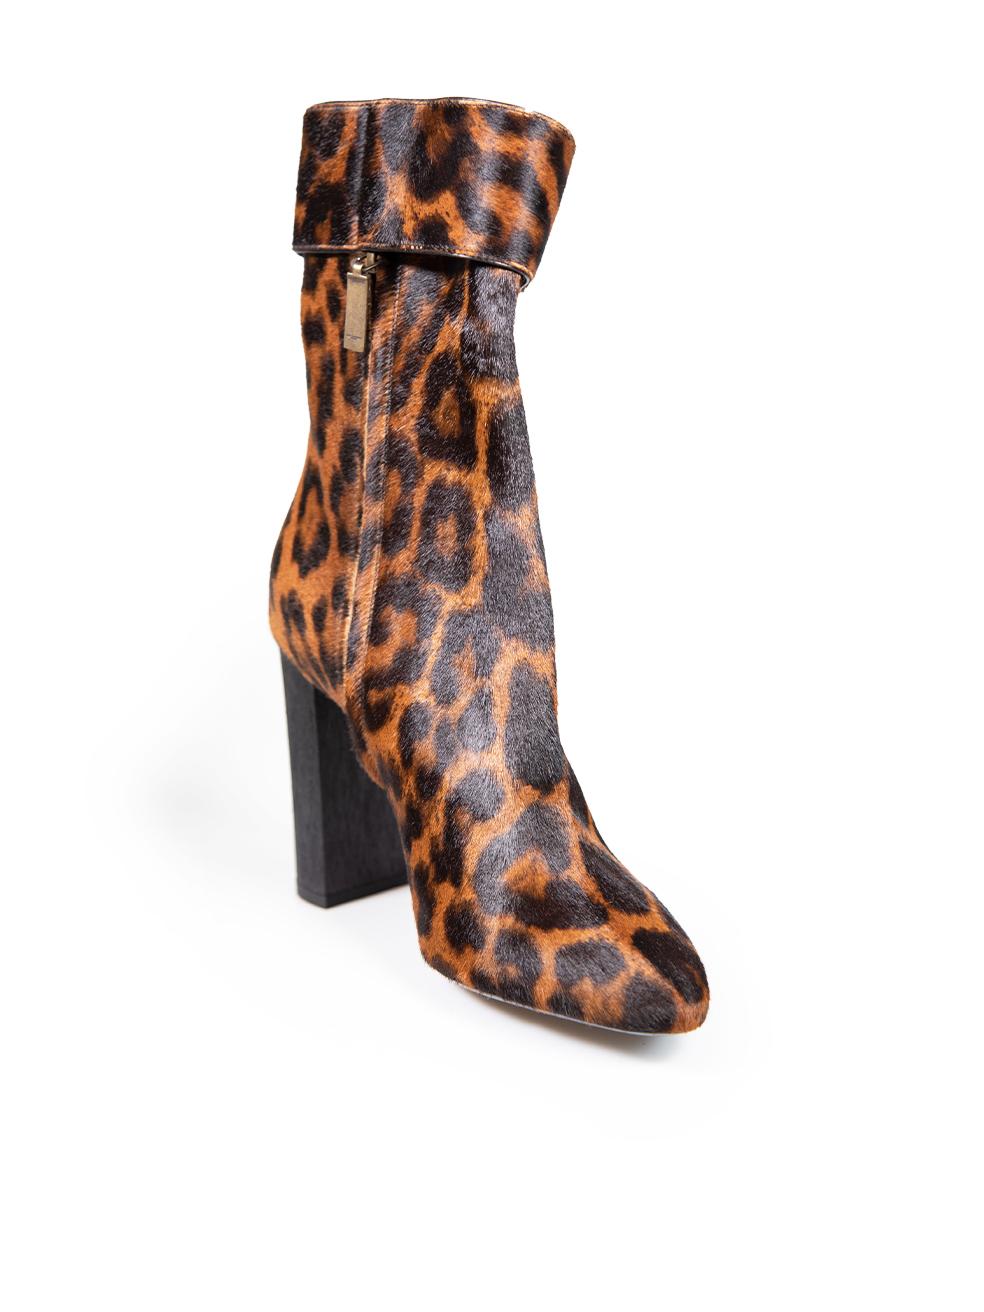 CONDITION is Never worn. No visible wear to boots is evident on this new Saint Laurent designer resale item. This item comes original dust bag and box.
 
 
 
 Details
 
 
 Model: Joplin
 
 Brown
 
 Pony hair
 
 Boots
 
 Leopard pattern
 
 Mid calf
